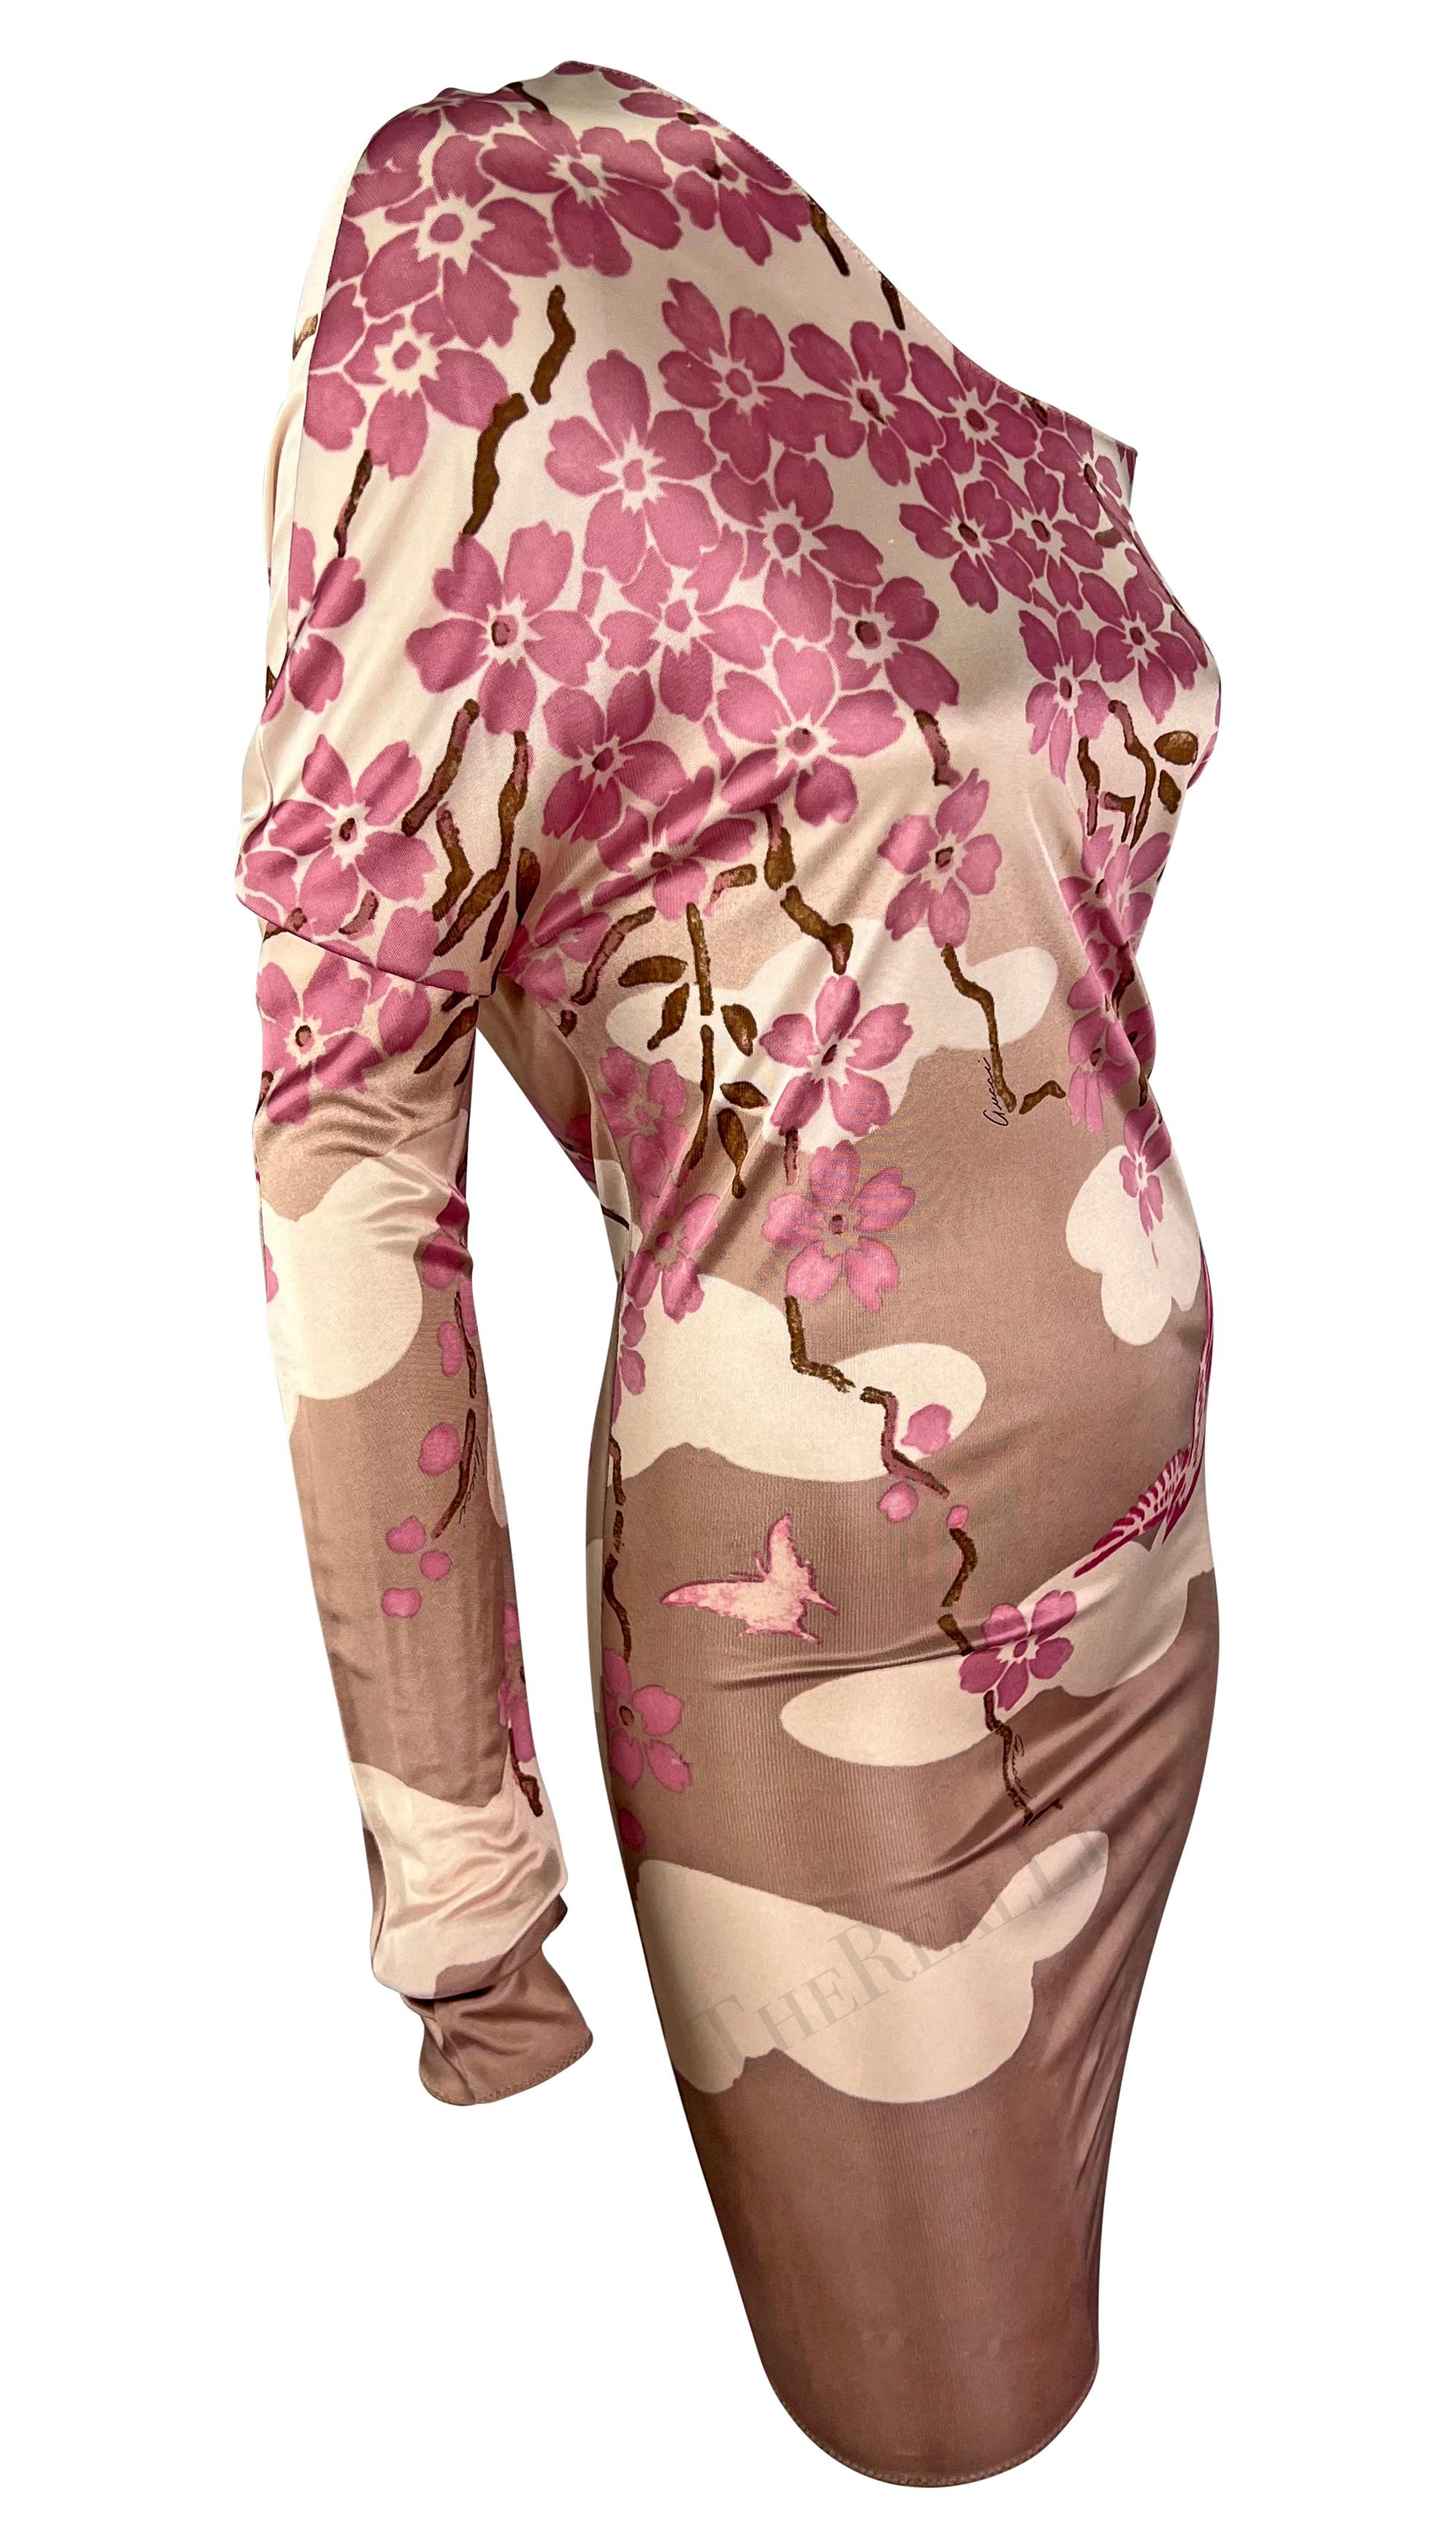 S/S 2003 Gucci by Tom Ford Pink Cherry Blossom Runway Mini Dress  For Sale 6